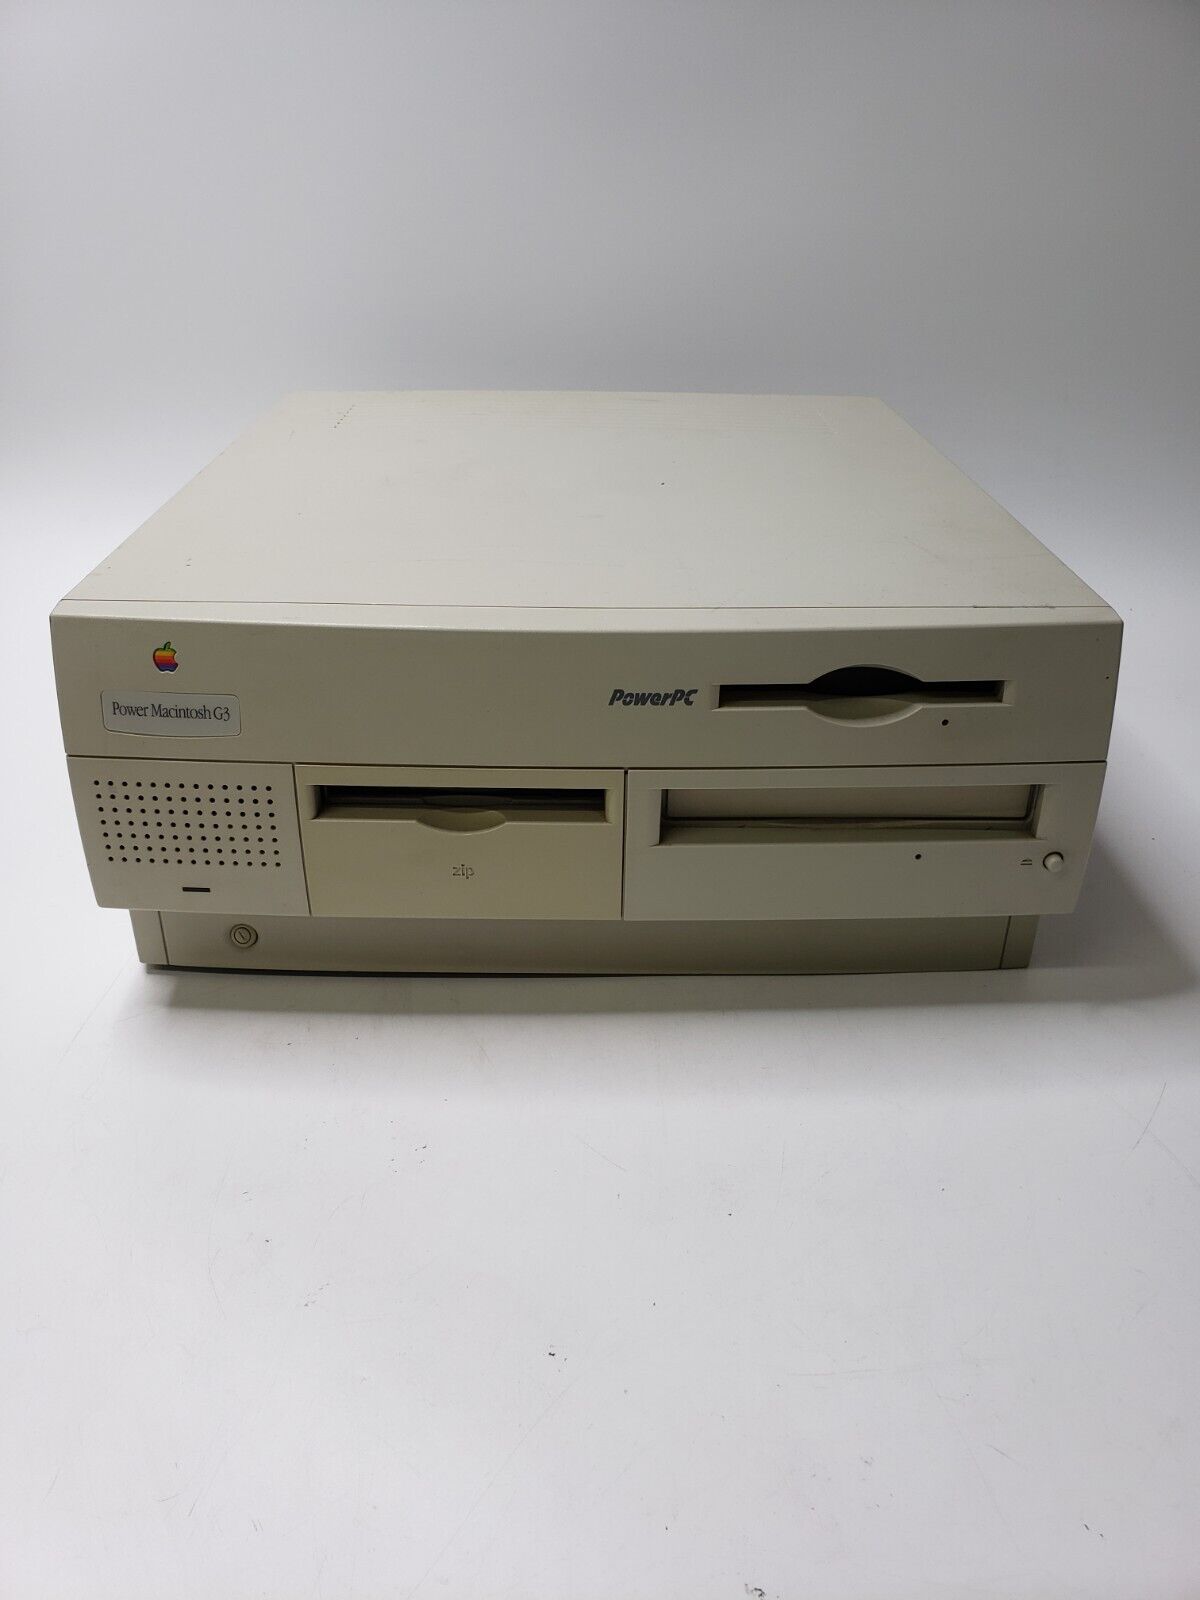 Vintage Apple Power Macintosh G3 233 MHz PowerPC -BOOTS UP  NO HDD NO OS